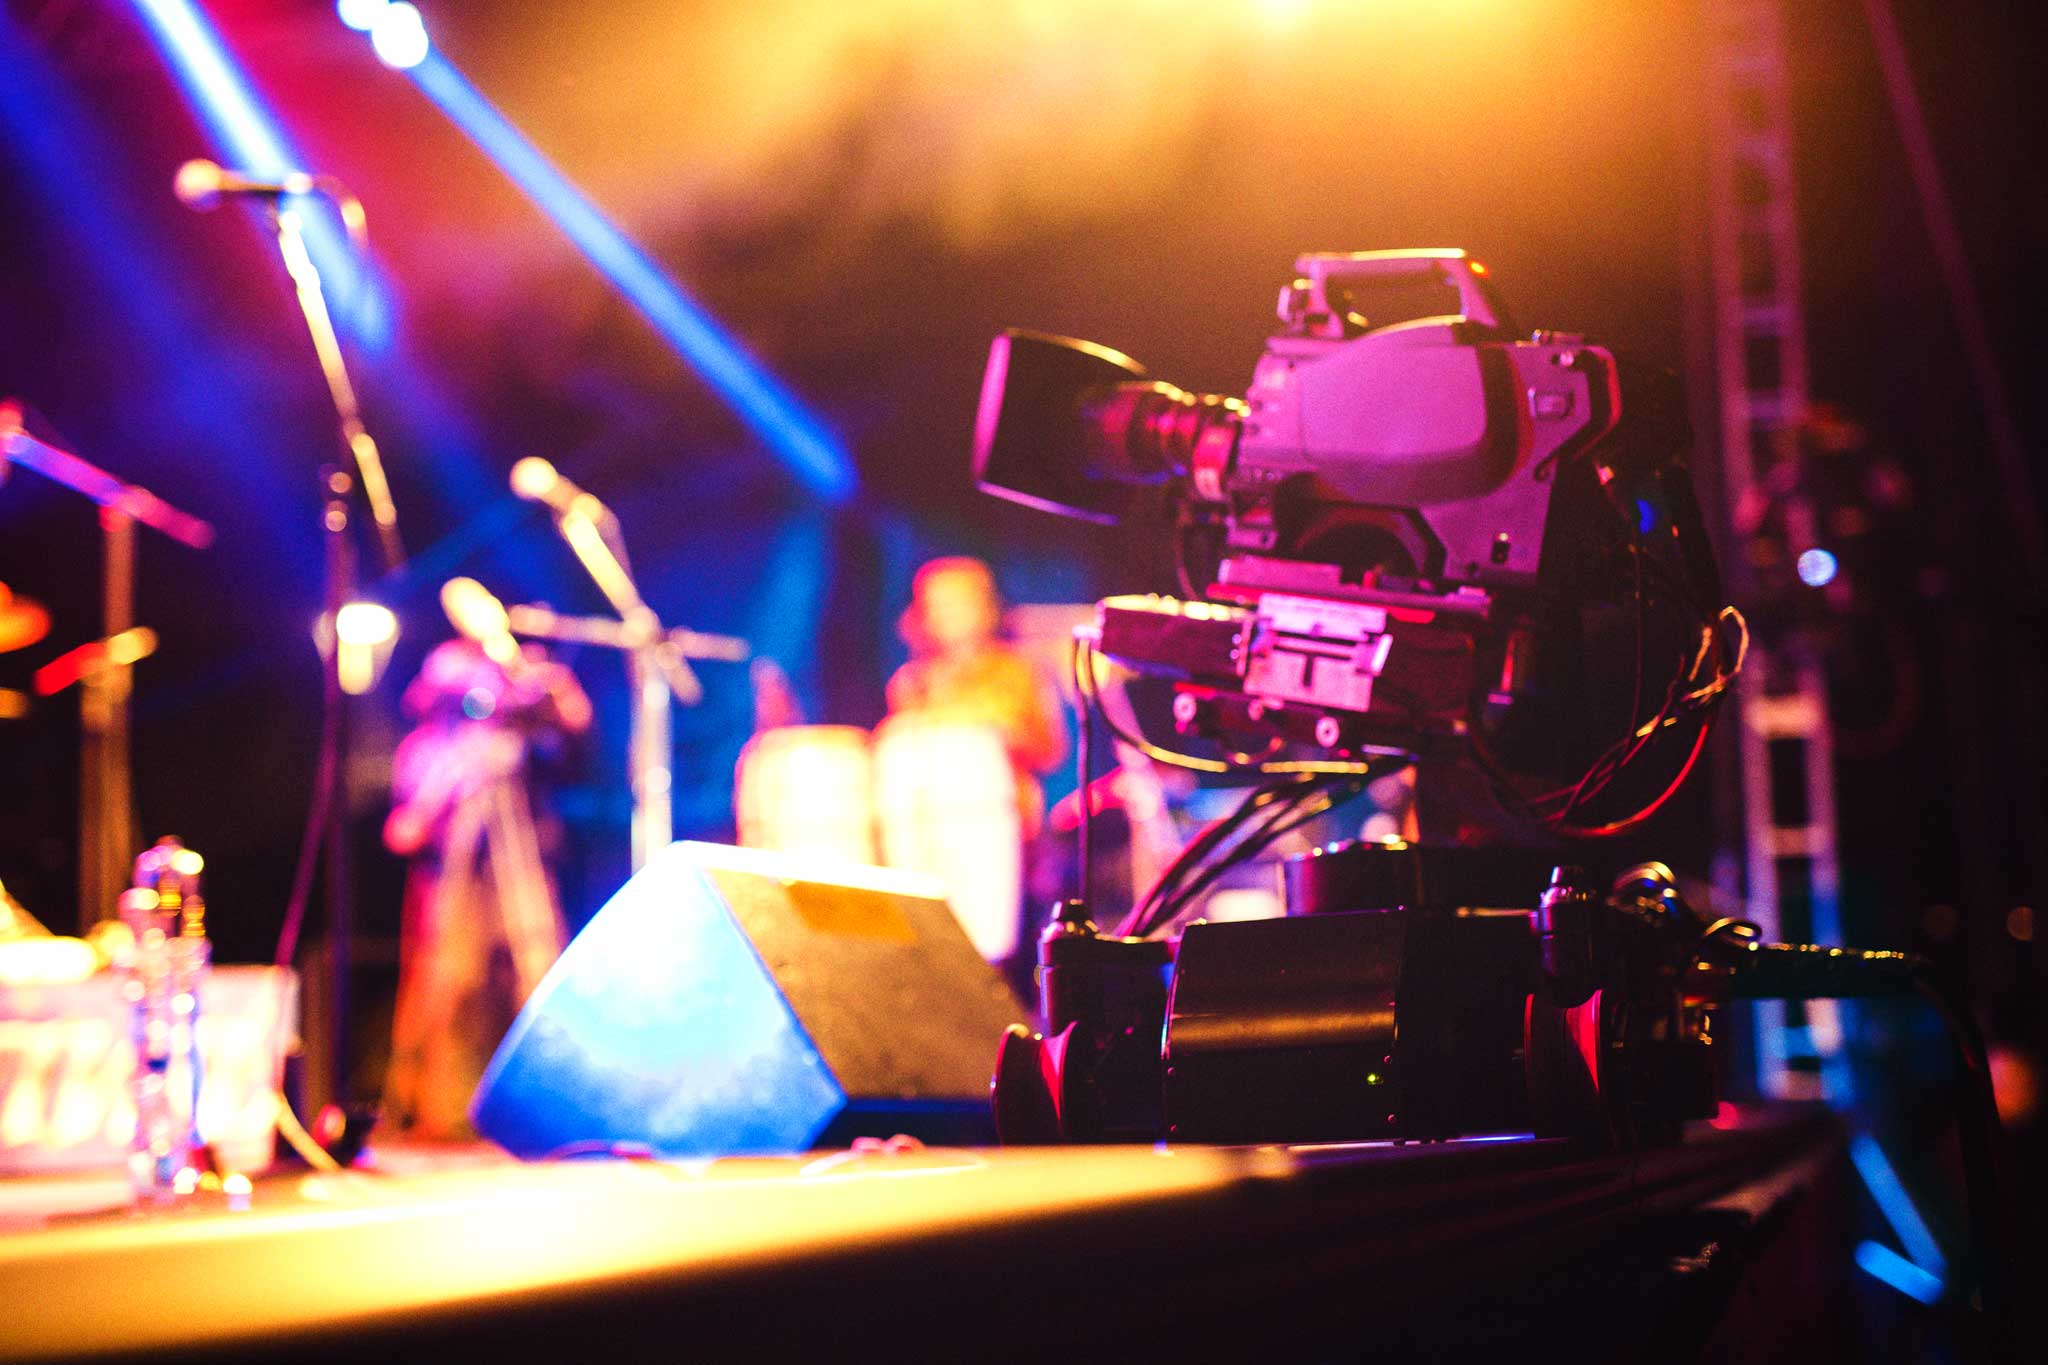 Professional video camera on stage filming live concert. Photo: iStock.com/mixetto